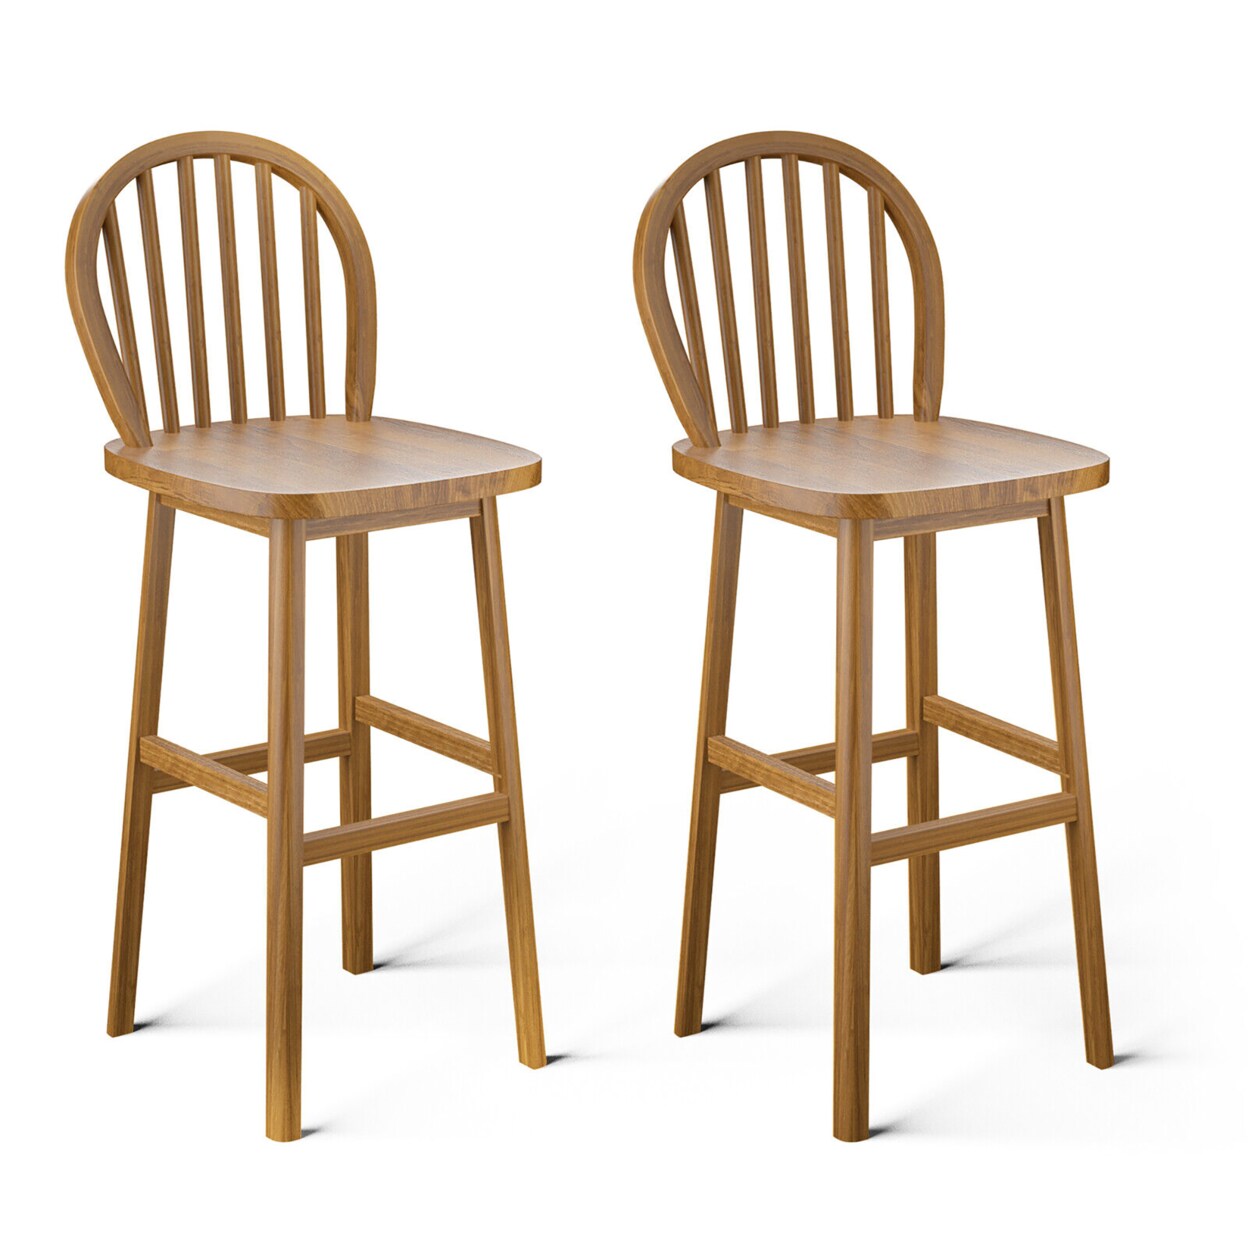 Gymax Set of 2 Bar Stools Spindle-Back Bar Height Rubber Wood Kitchen Chairs Natural